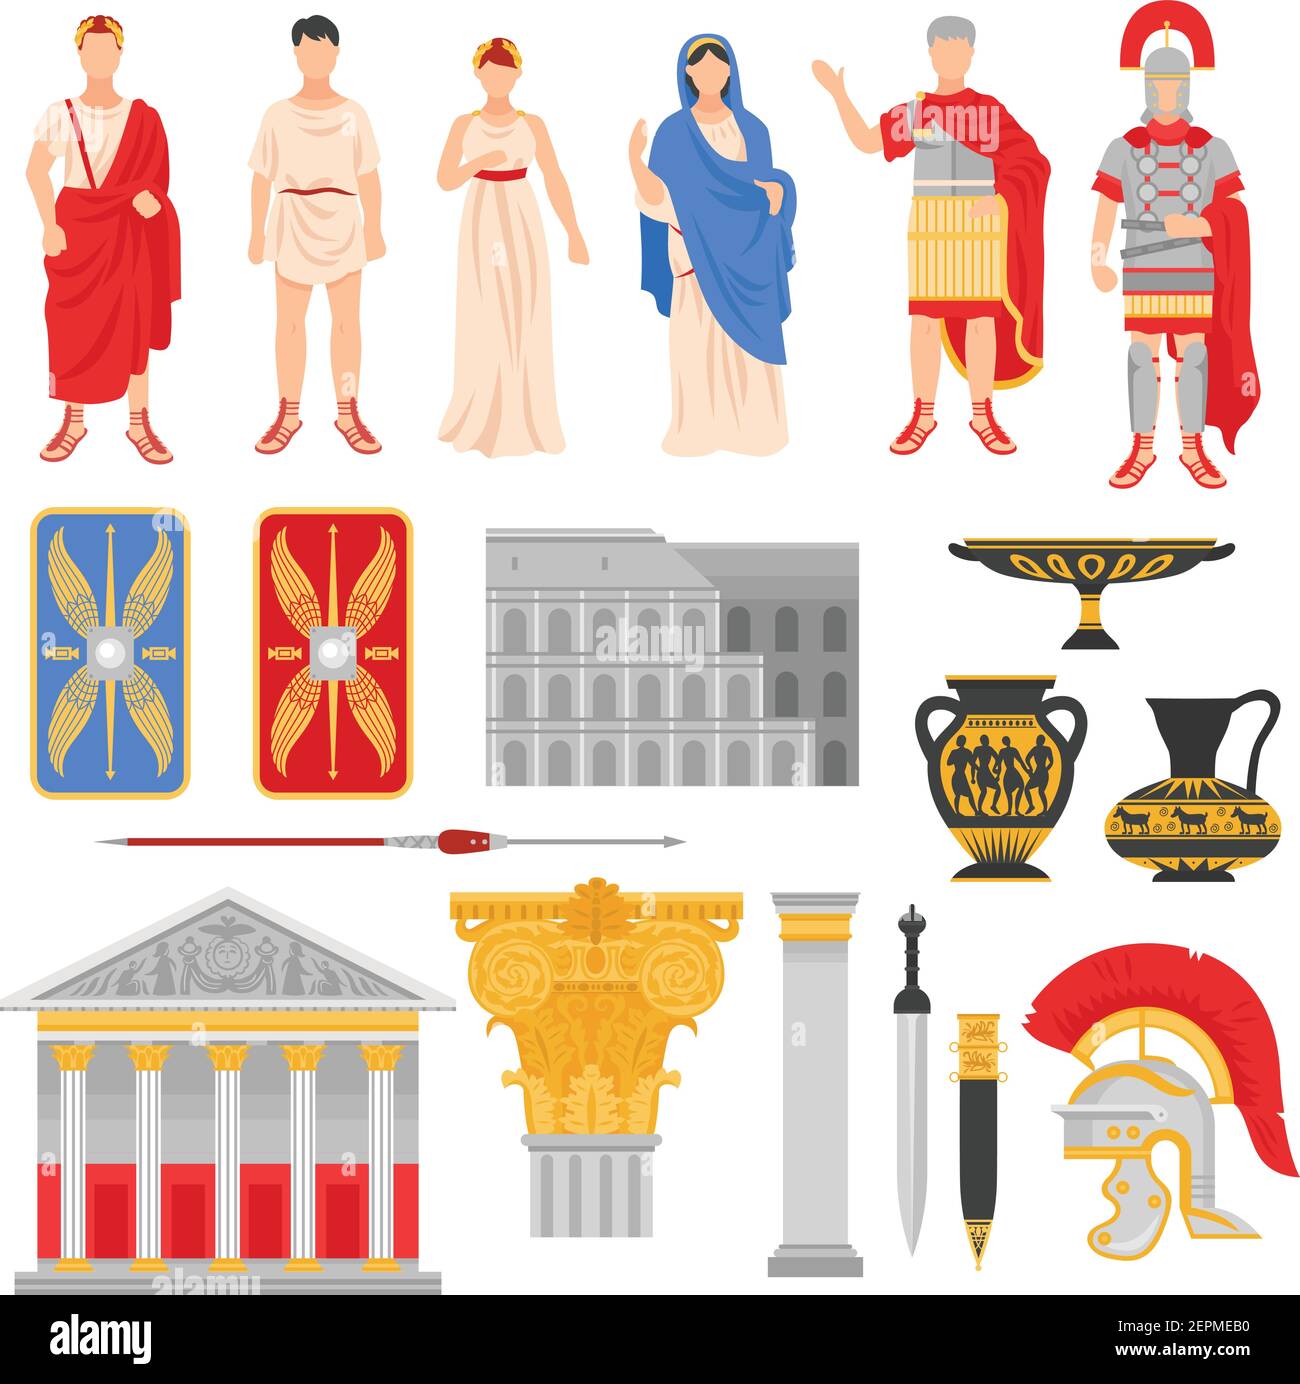 Ancient rome empire set of isolated flat images with pantheons legionnaire outfit weapons and human characters vector illustration Stock Vector